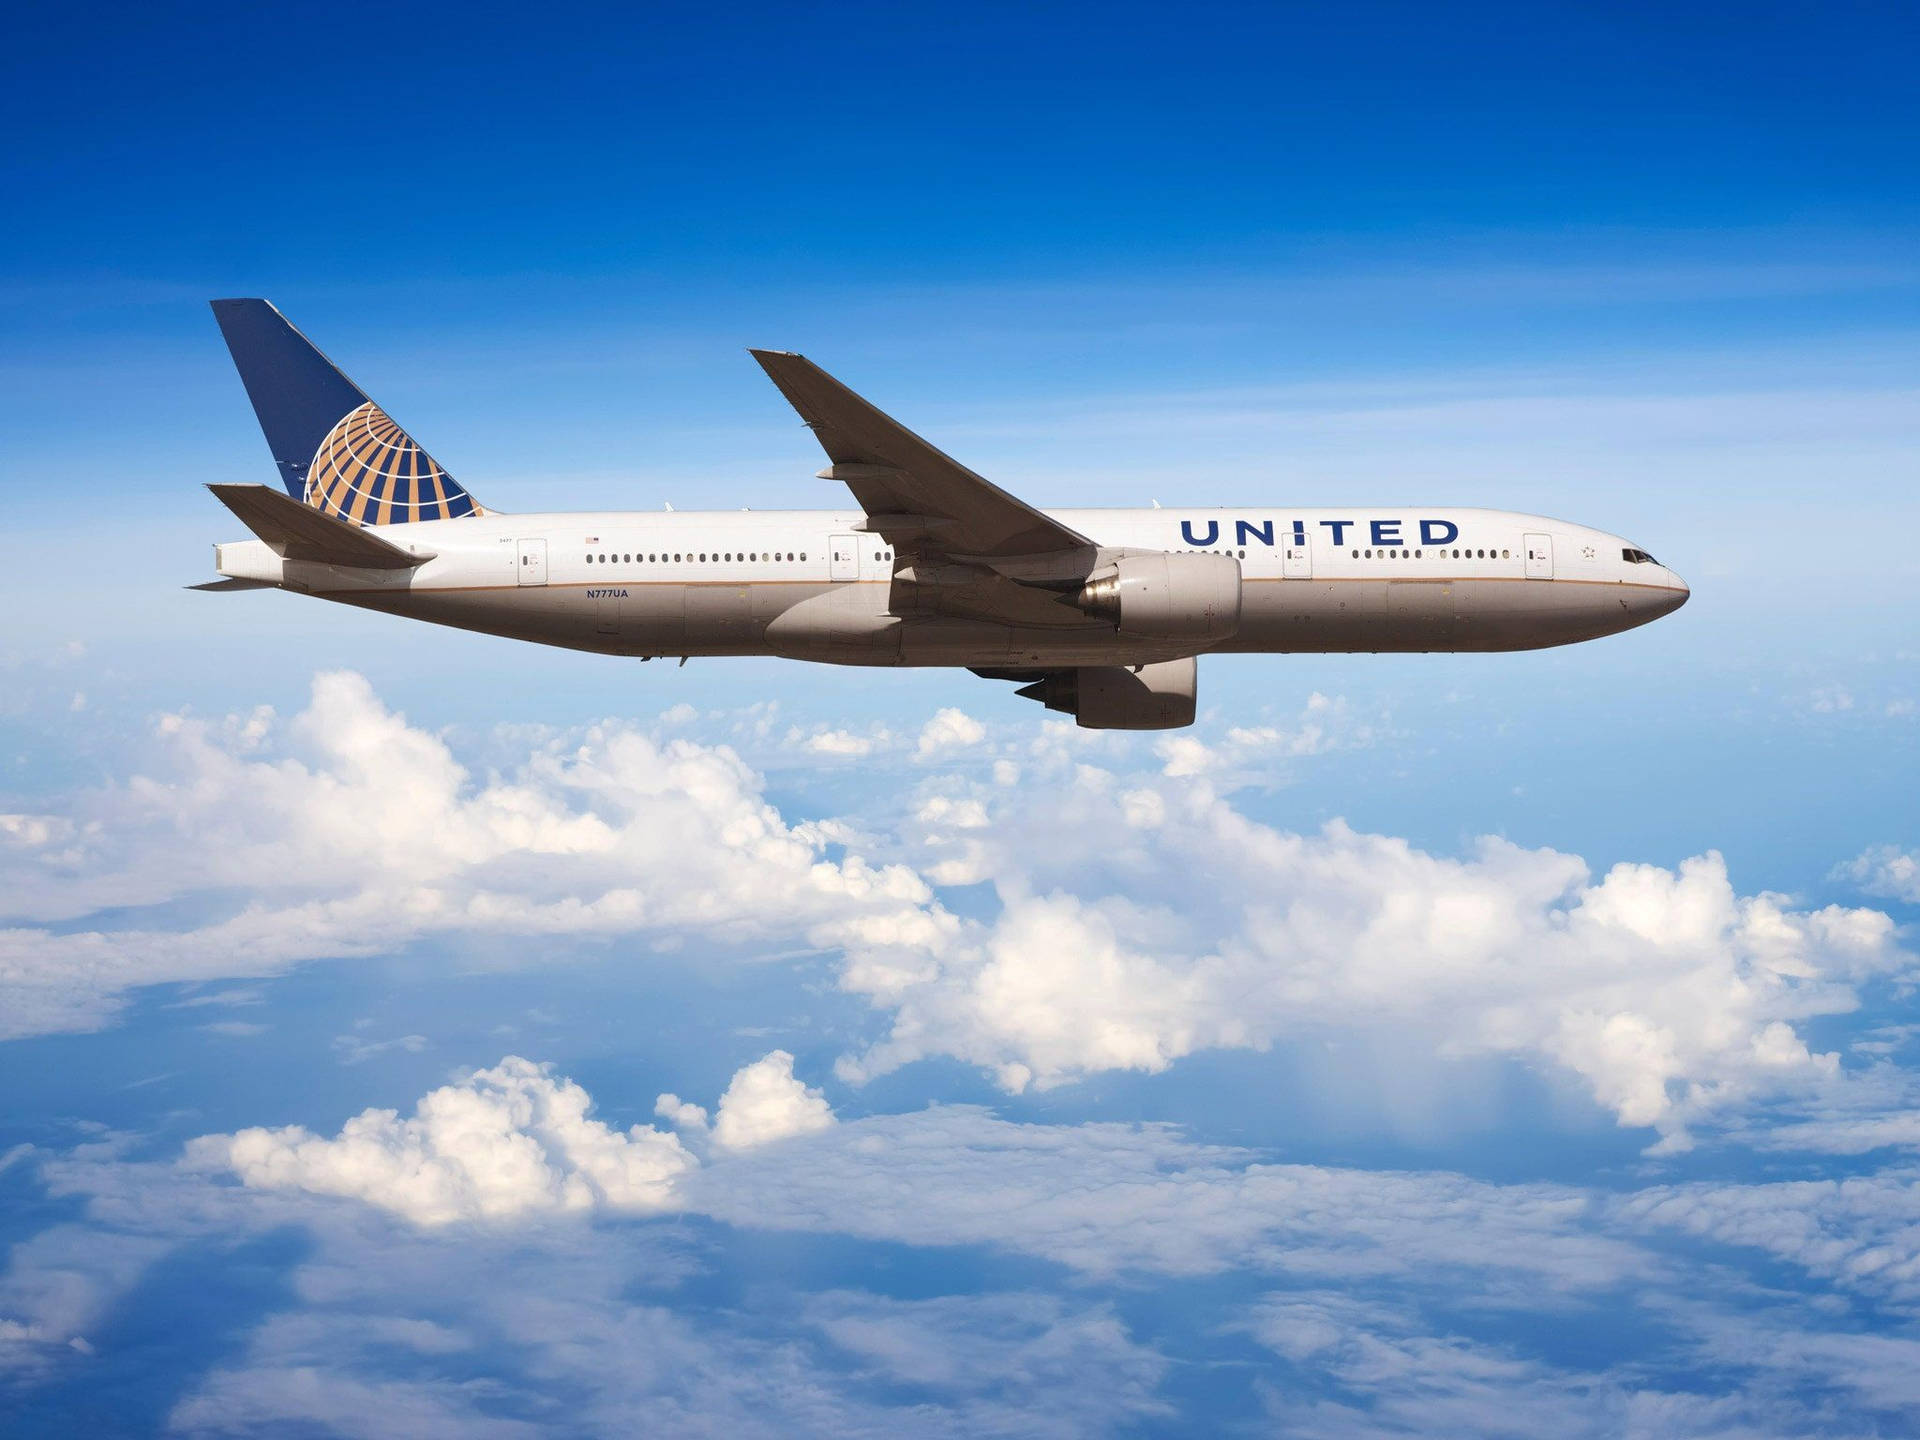 Winging United Airlines Plane Wallpaper